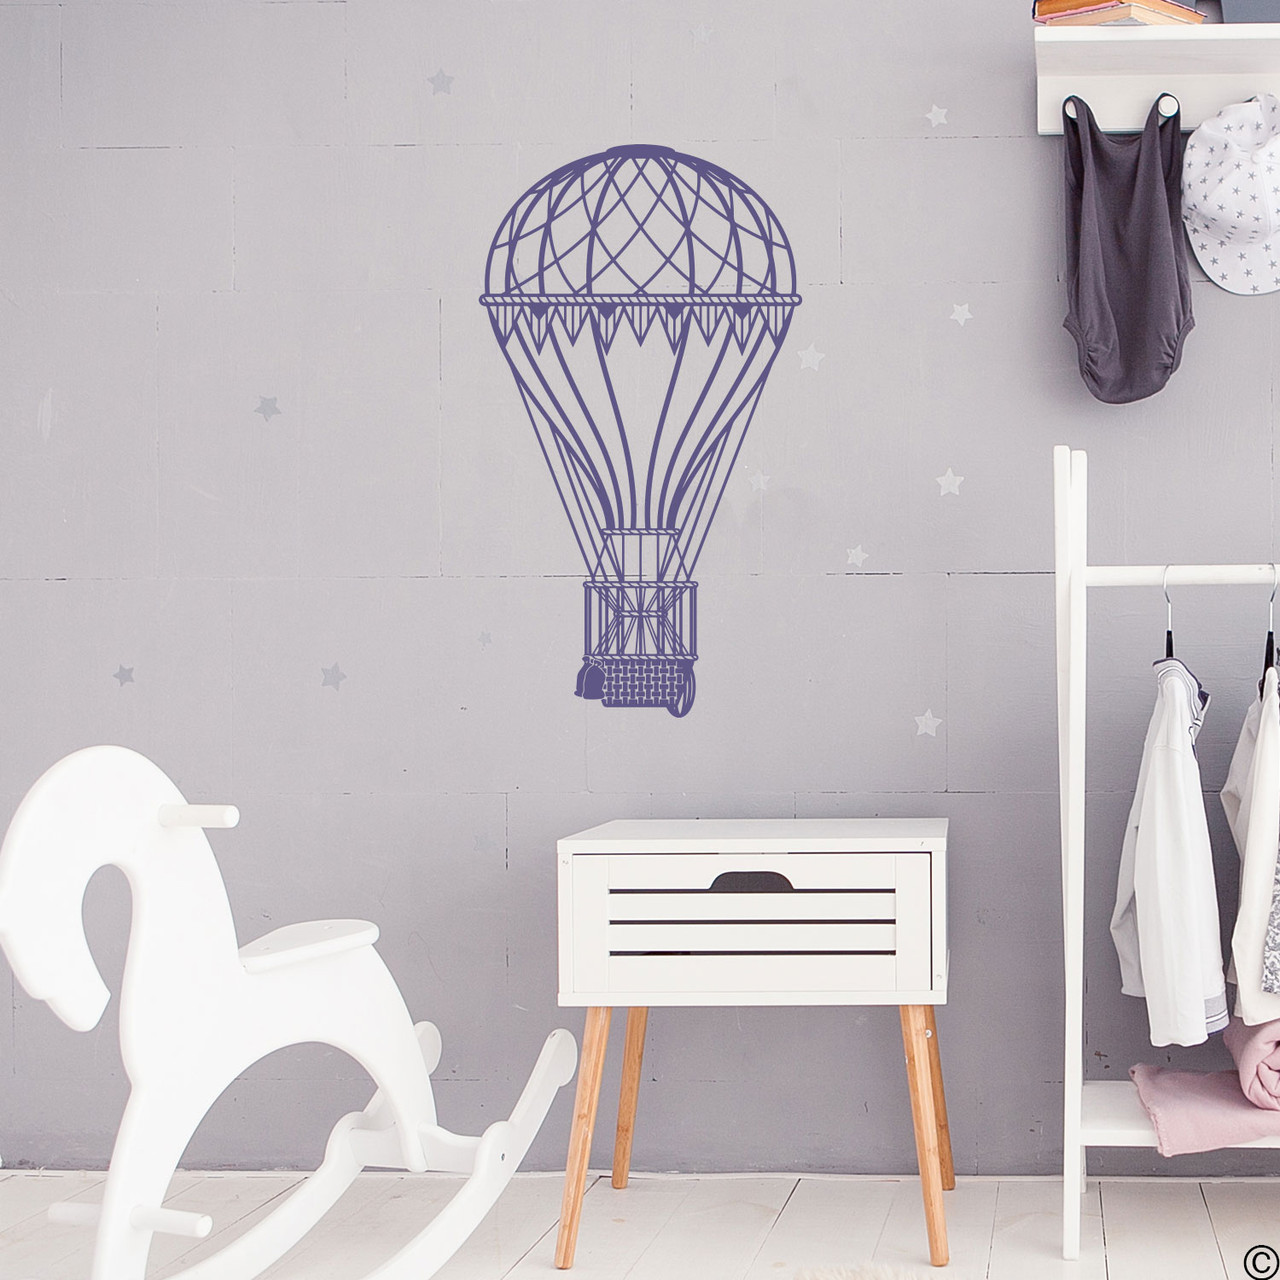 The Hot Air Balloon, design #2, wall decal in limited edition orchid color.